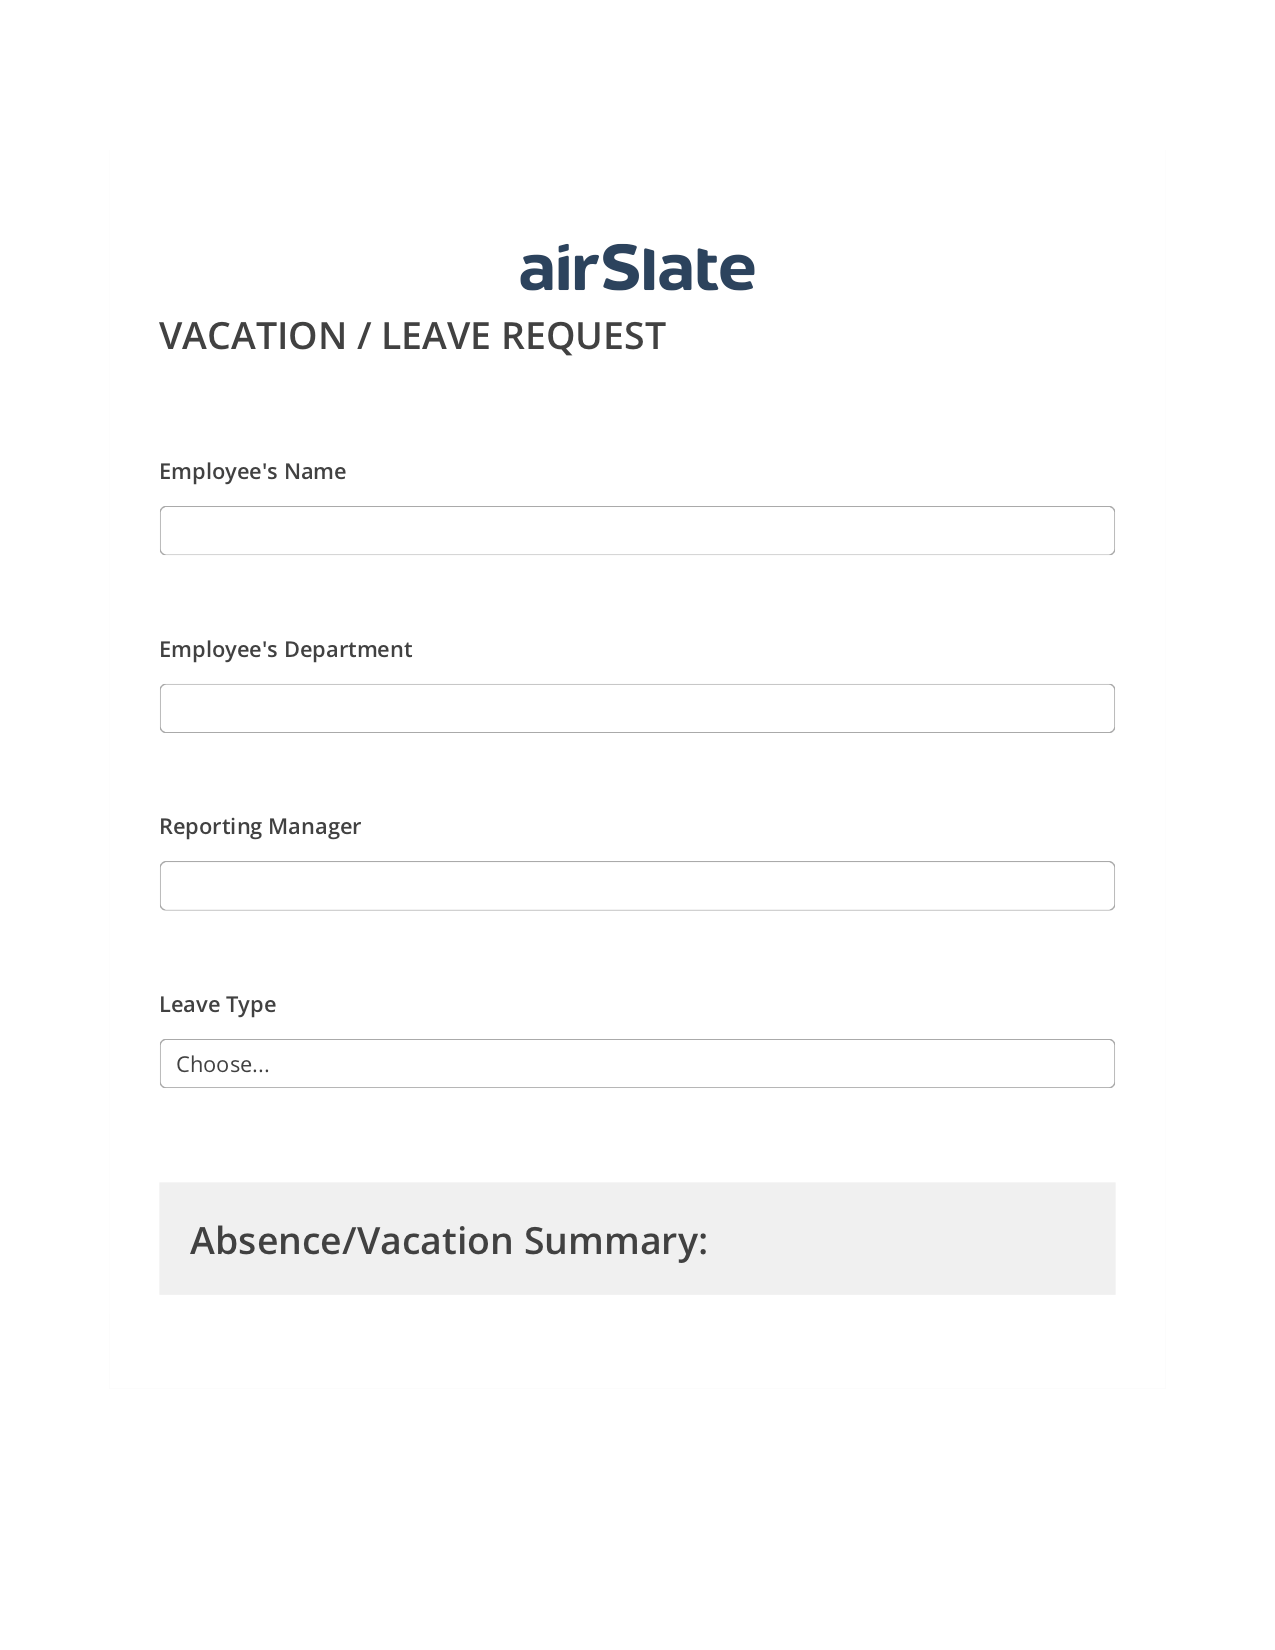 Multirole Vacation/Leave Request Workflow Pre-fill from MS Dynamics 365 Records, System Bot - Create a Slate in another Flow, Slack Two-Way Binding Bot